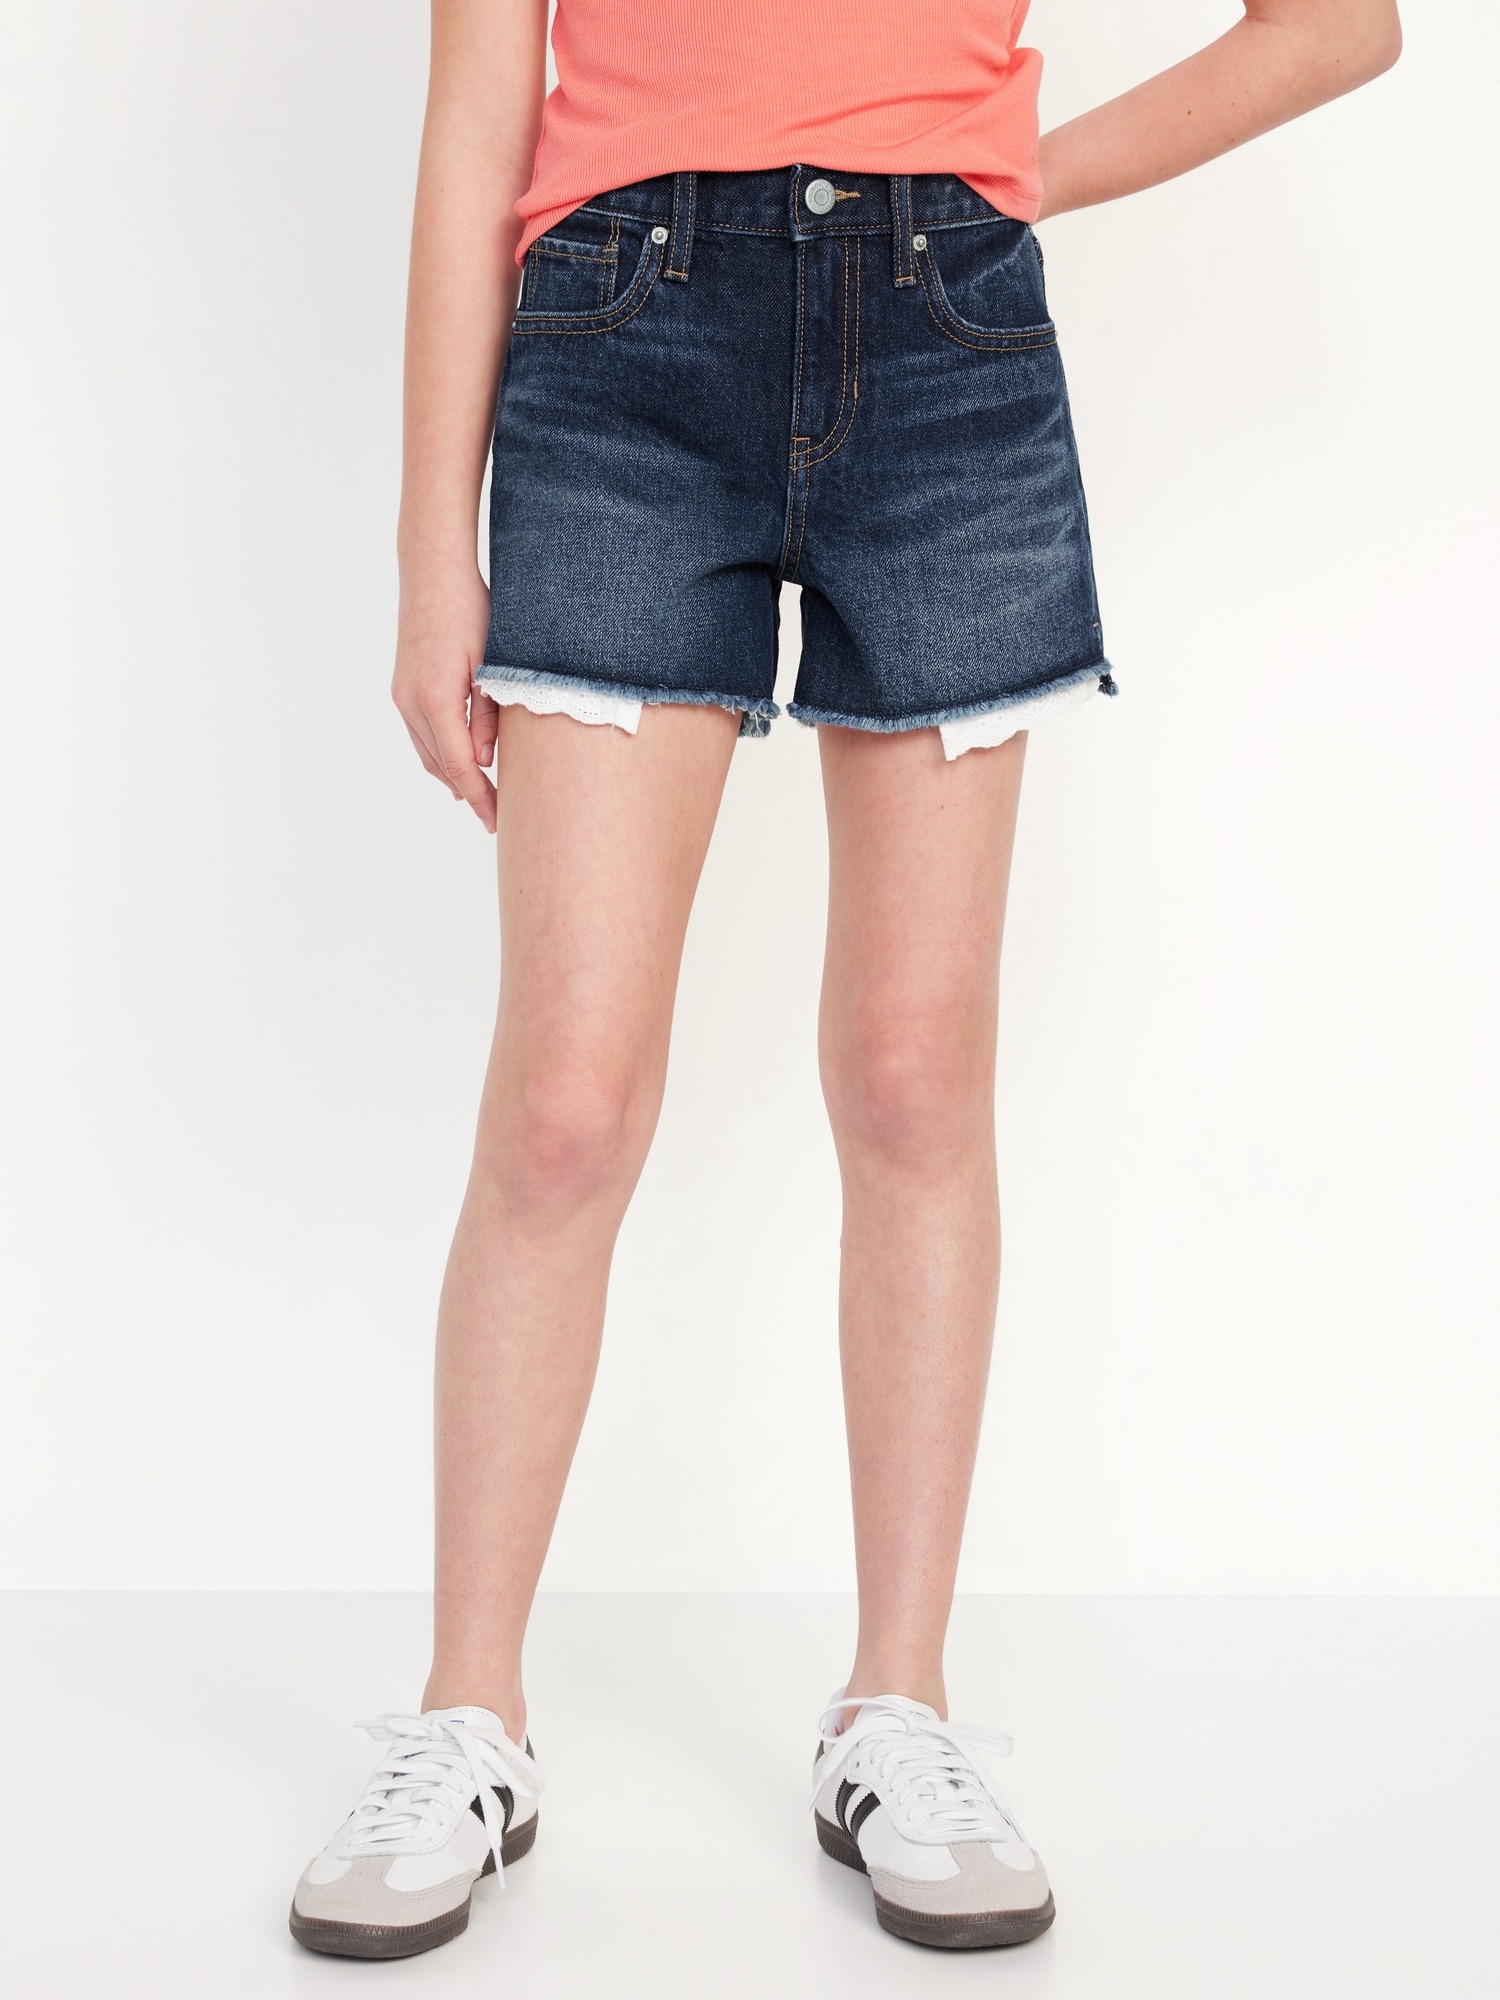 High-Waisted Exposed Lace-Pocket Jean Shorts for Girls